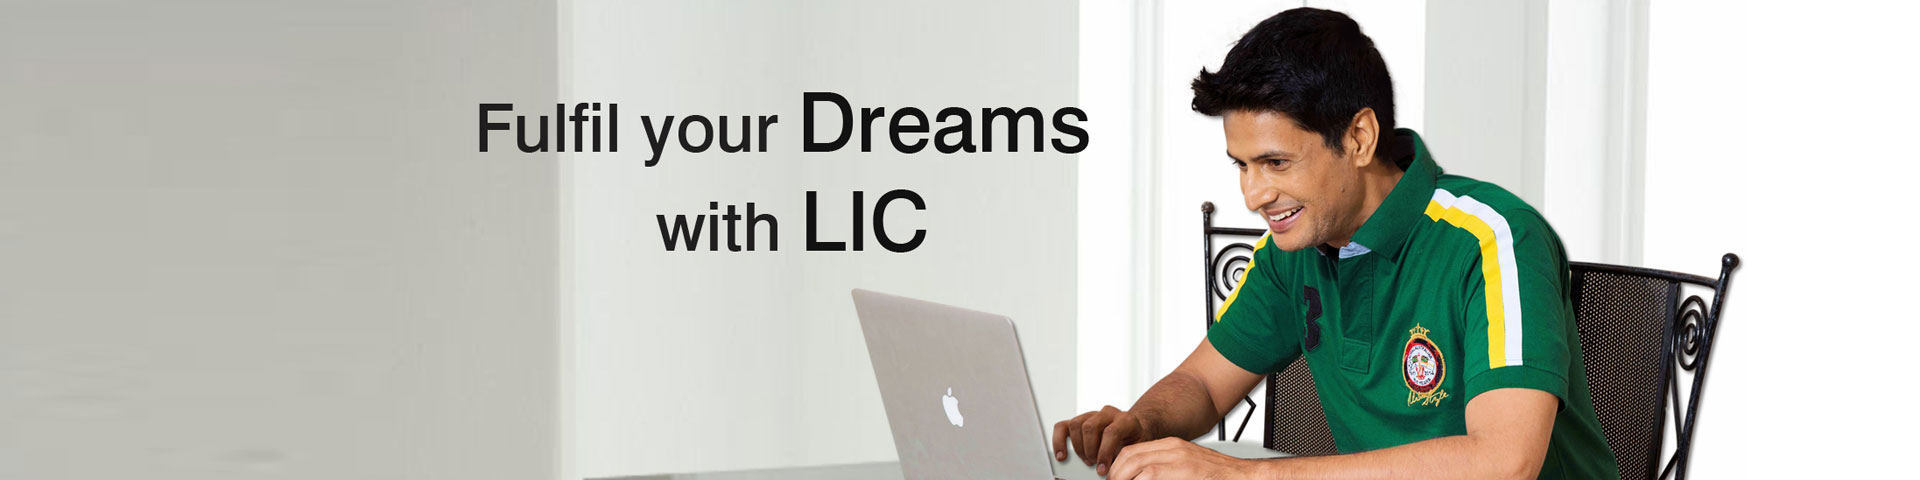 want to become lic agent in delhi